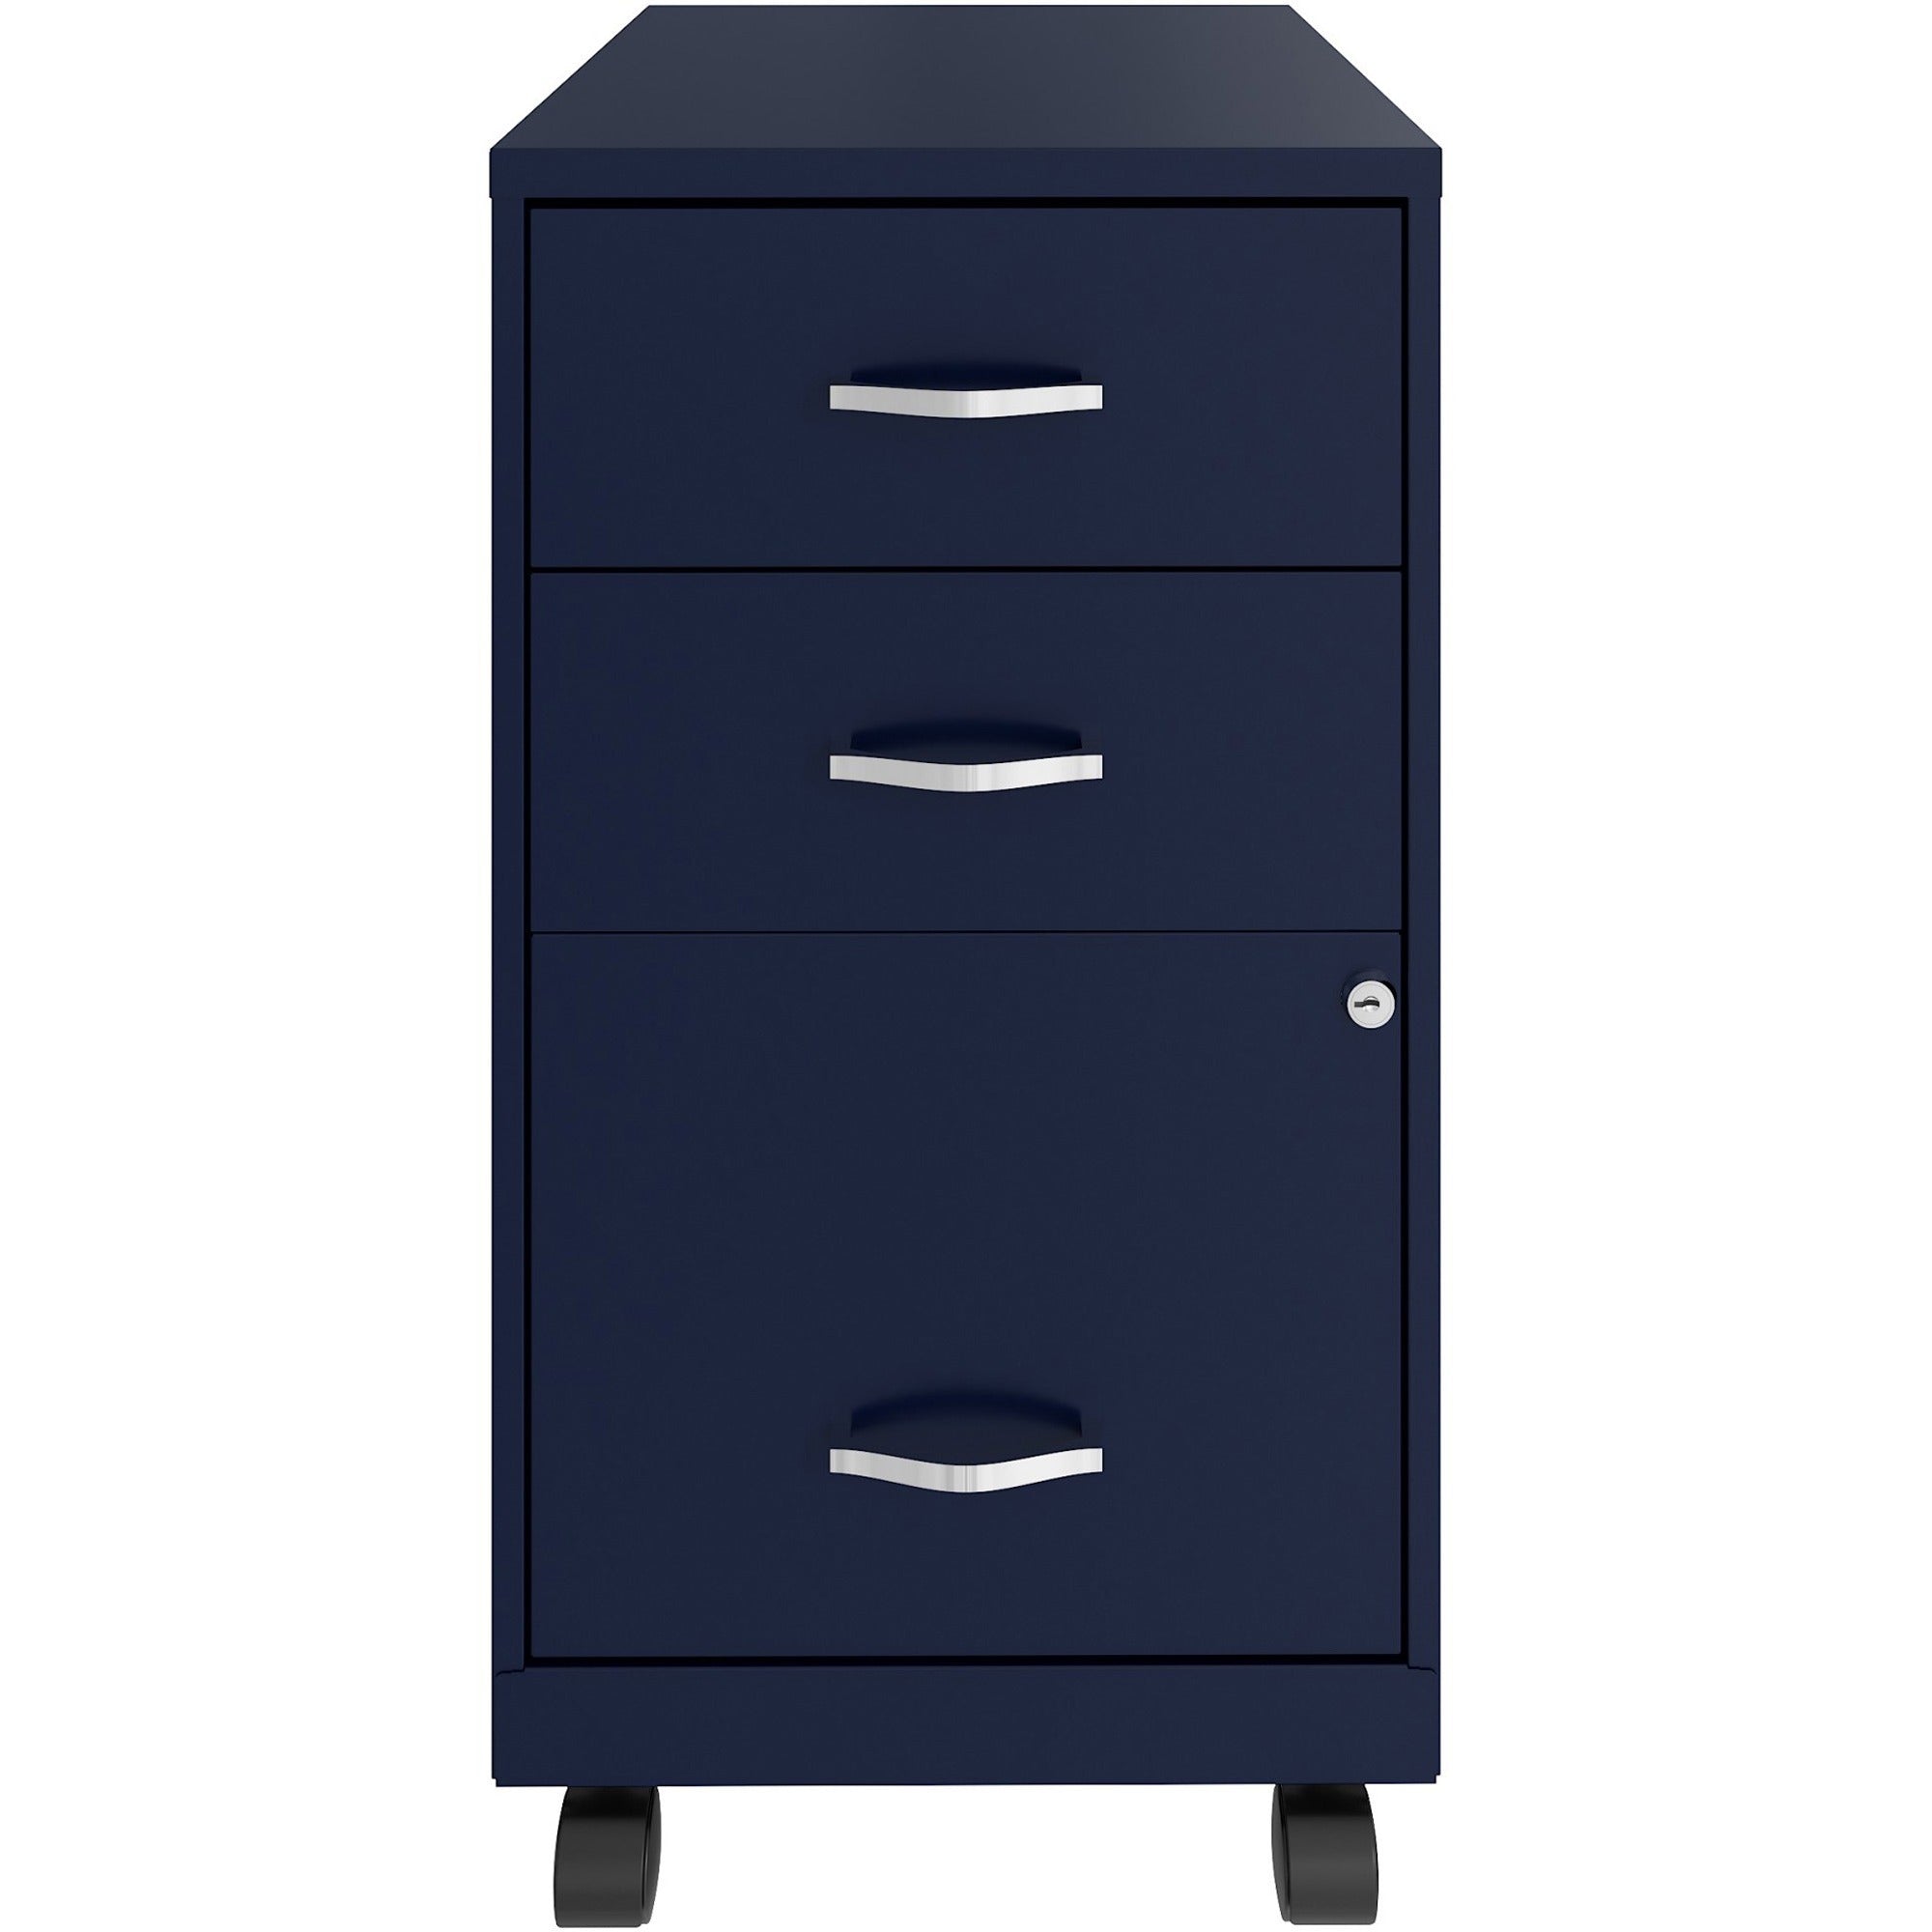 nusparc-3-drawer-organizer-metal-file-cabinet-142-x-18-x-267-3-x-drawers-for-file-box-letter-glide-suspension-3-4-drawer-extension-anti-tip-lockable-mobility-navy-metal-recycled_nprvf318cmny - 2